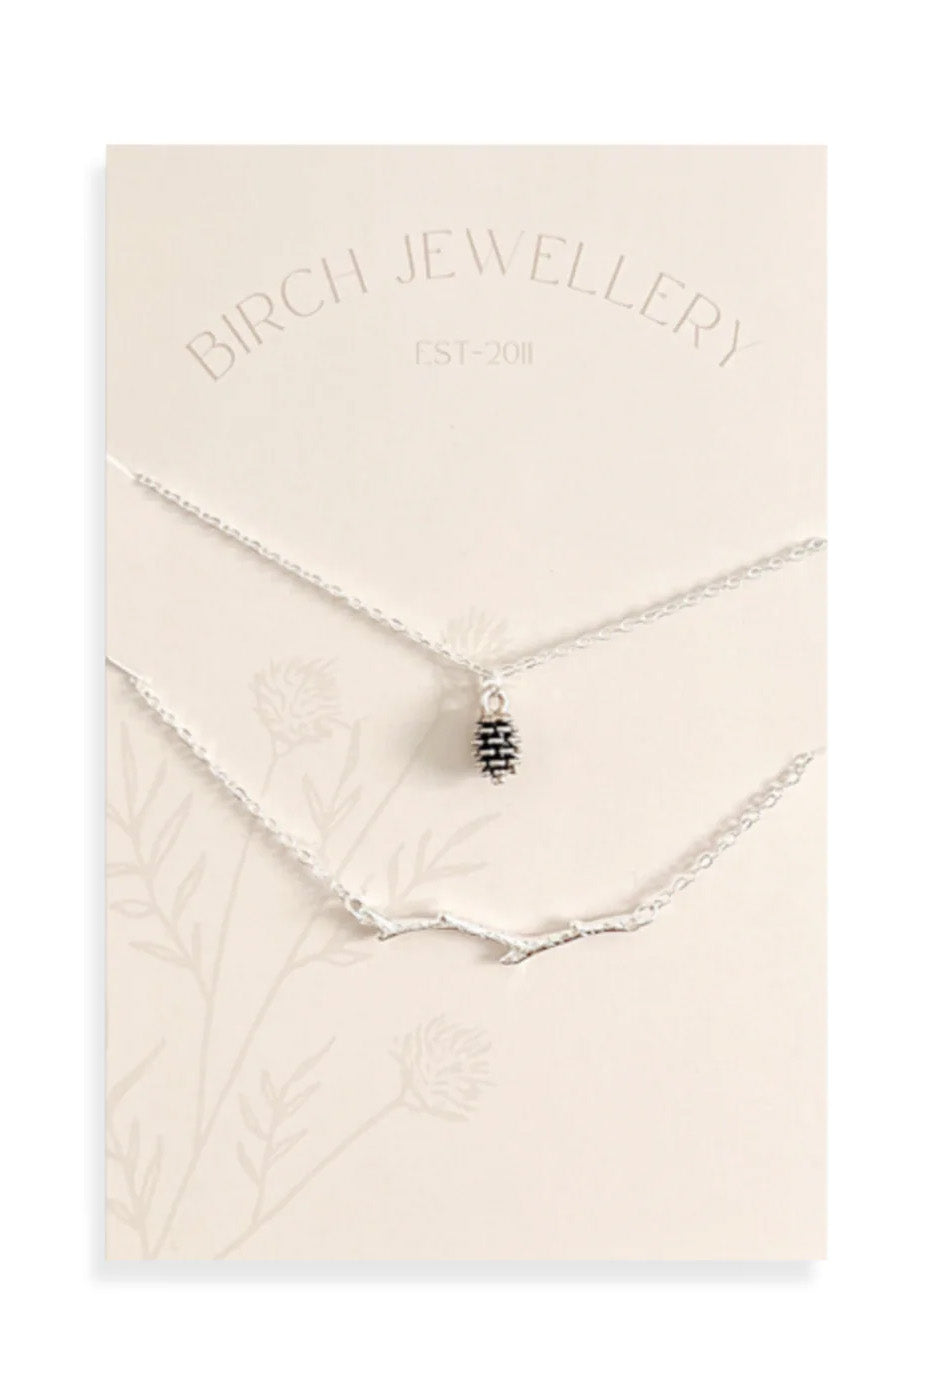 Pine Cone and Branch Layering Set by Birch Jewellery, Silver, made in Ottawa